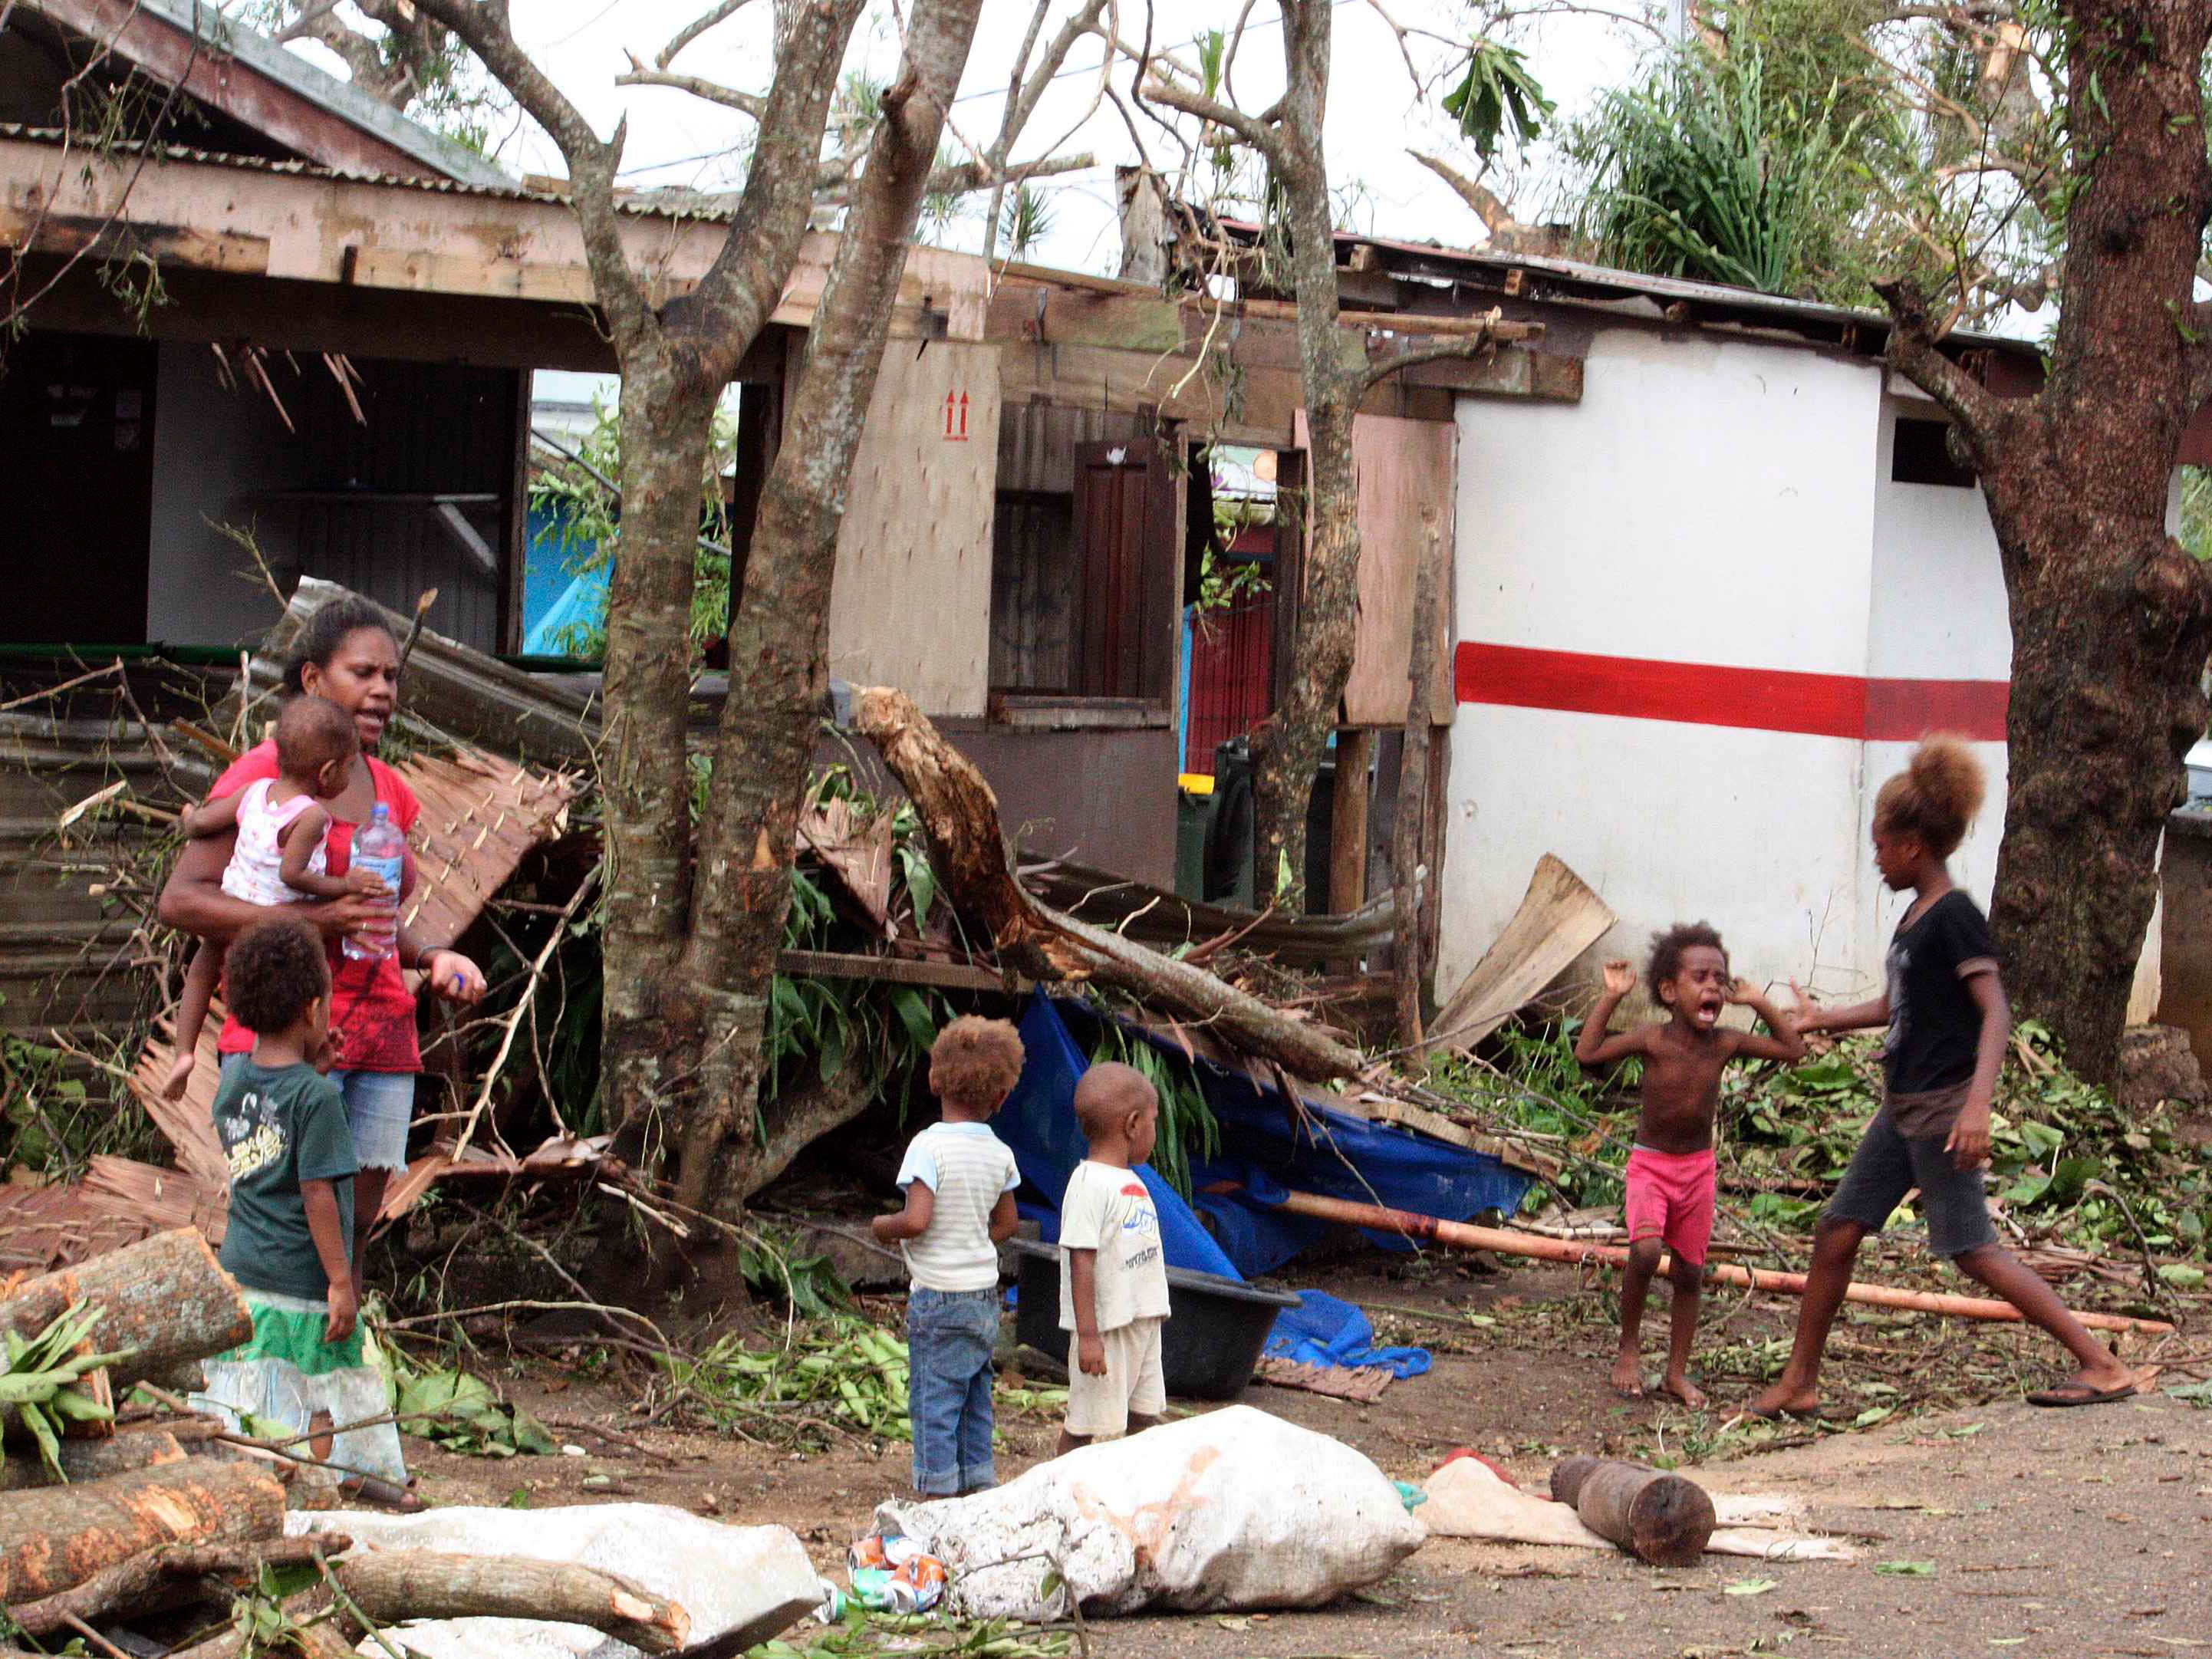 A woman carrying a baby stands with children outside homes damaged by Cyclone Pam, on a street surrounded by debris in Port Vila